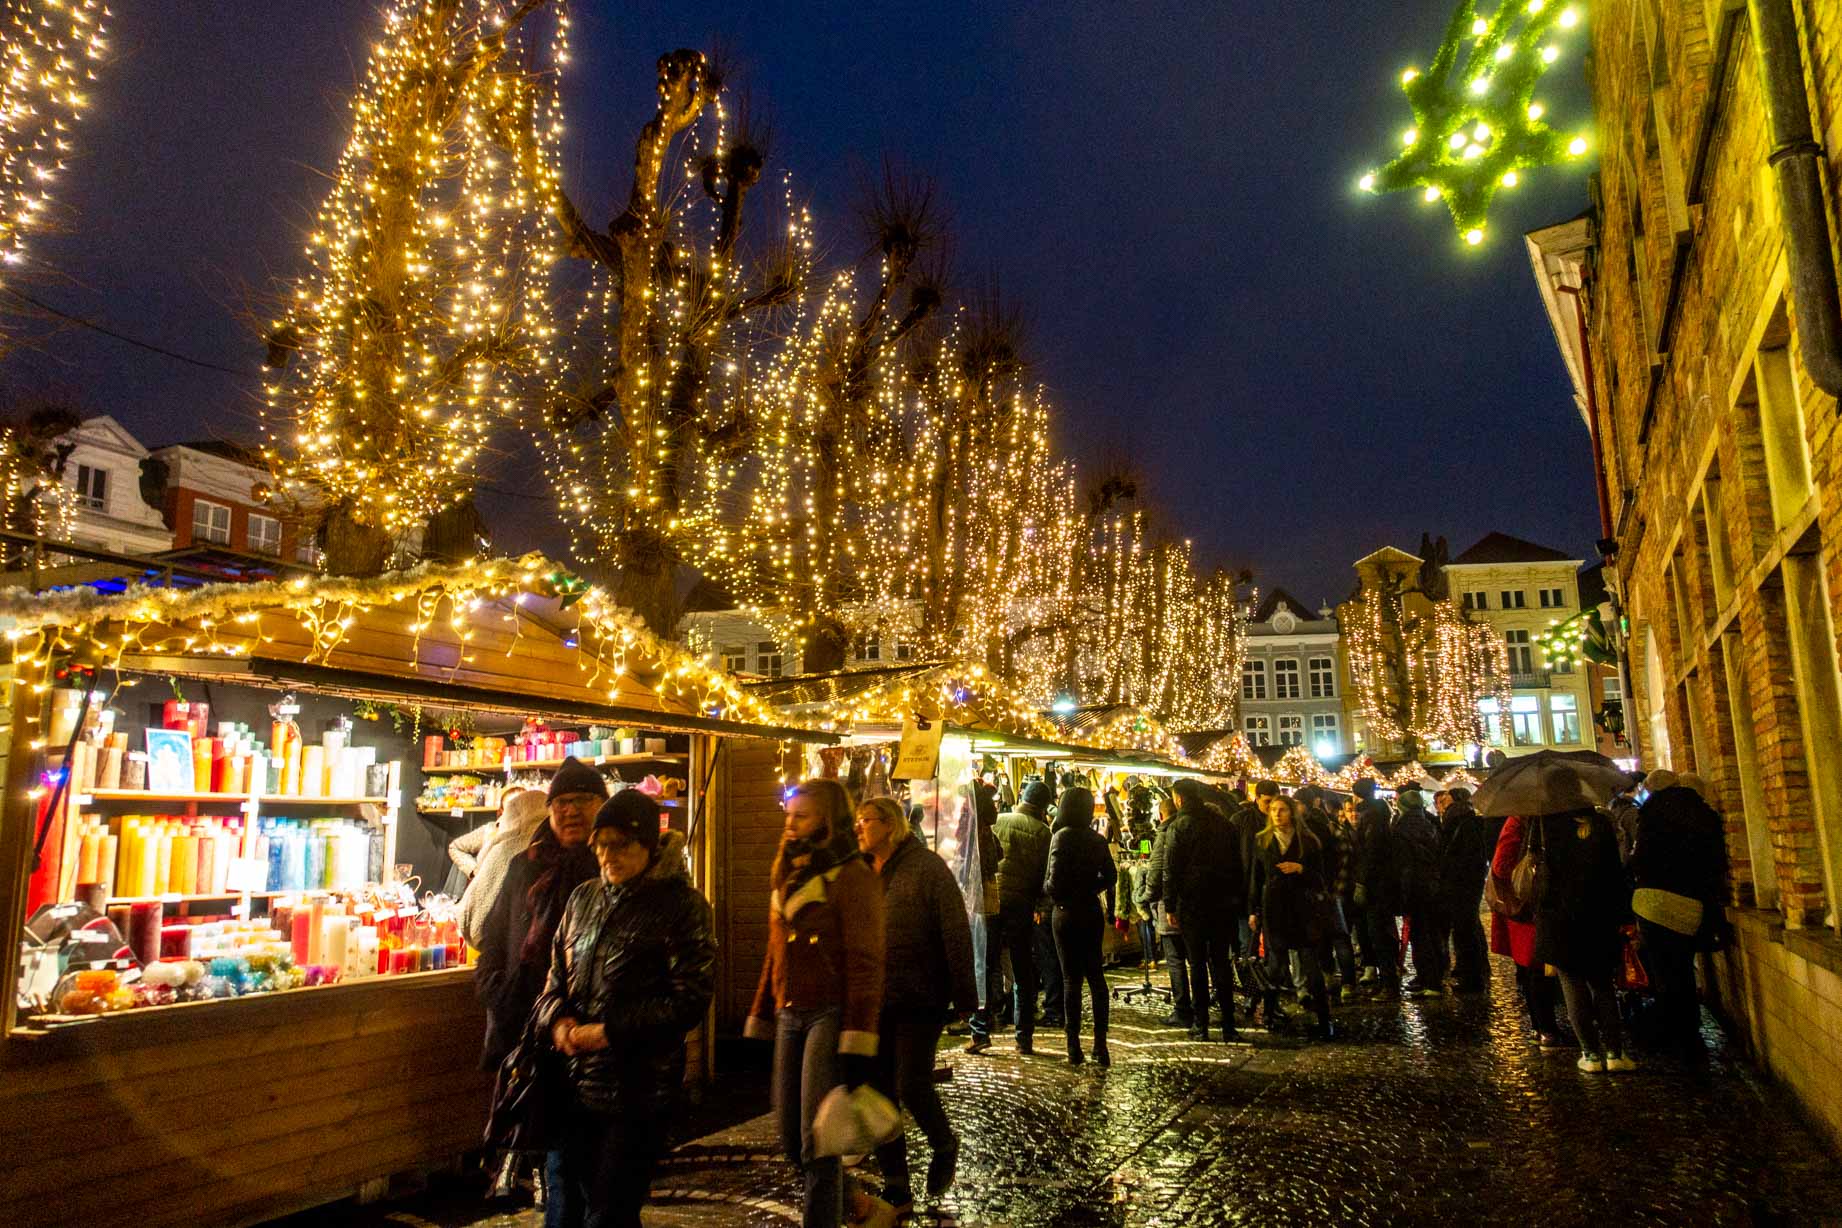 Visiting Bruges Christmas Market (2020) What to See, Eat, and Do